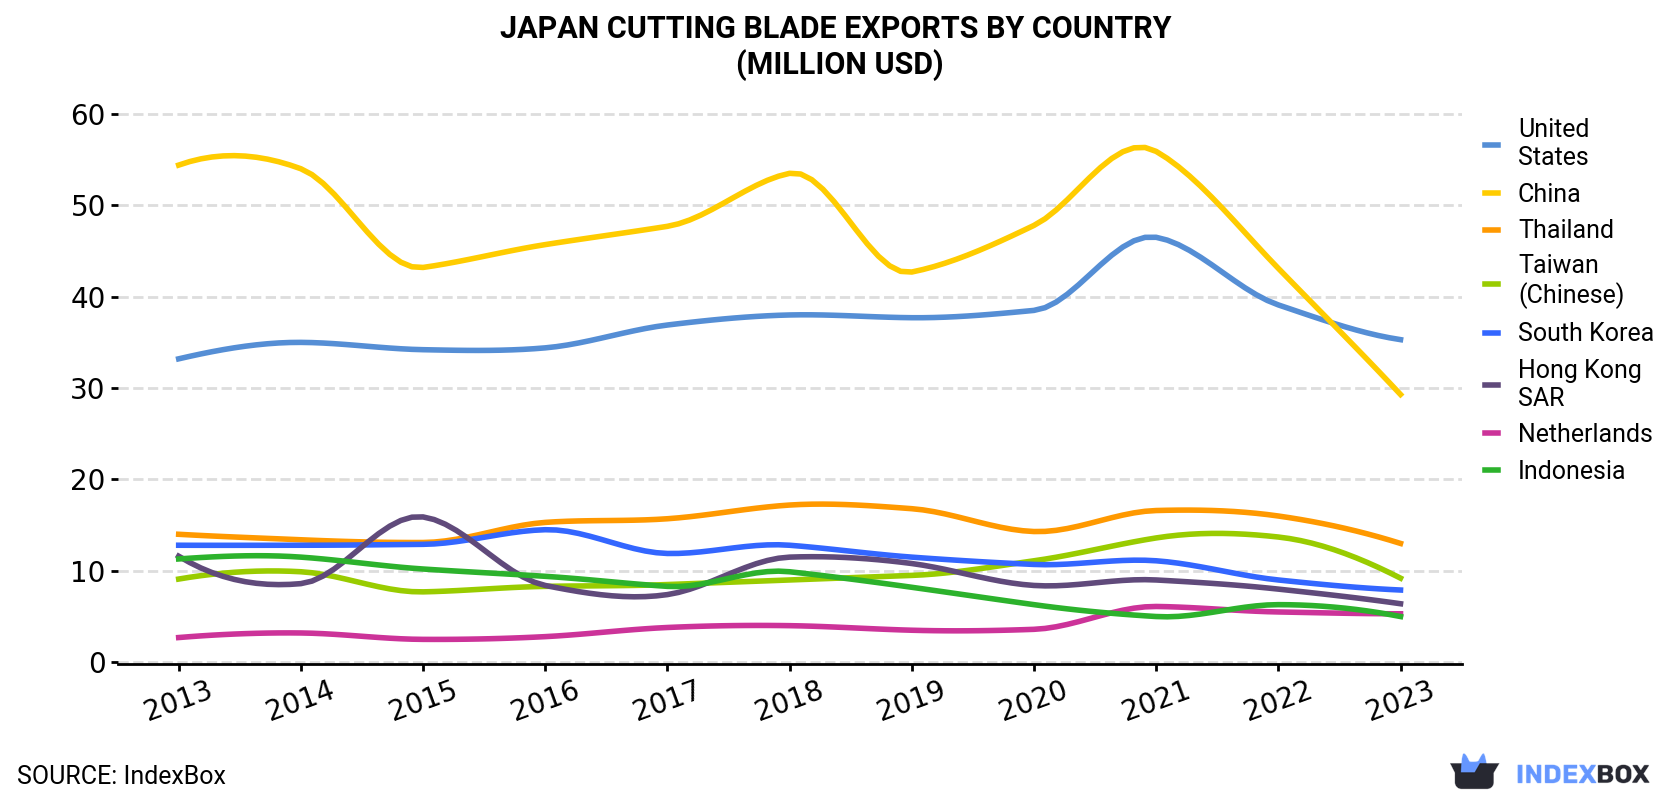 Japan Cutting Blade Exports By Country (Million USD)